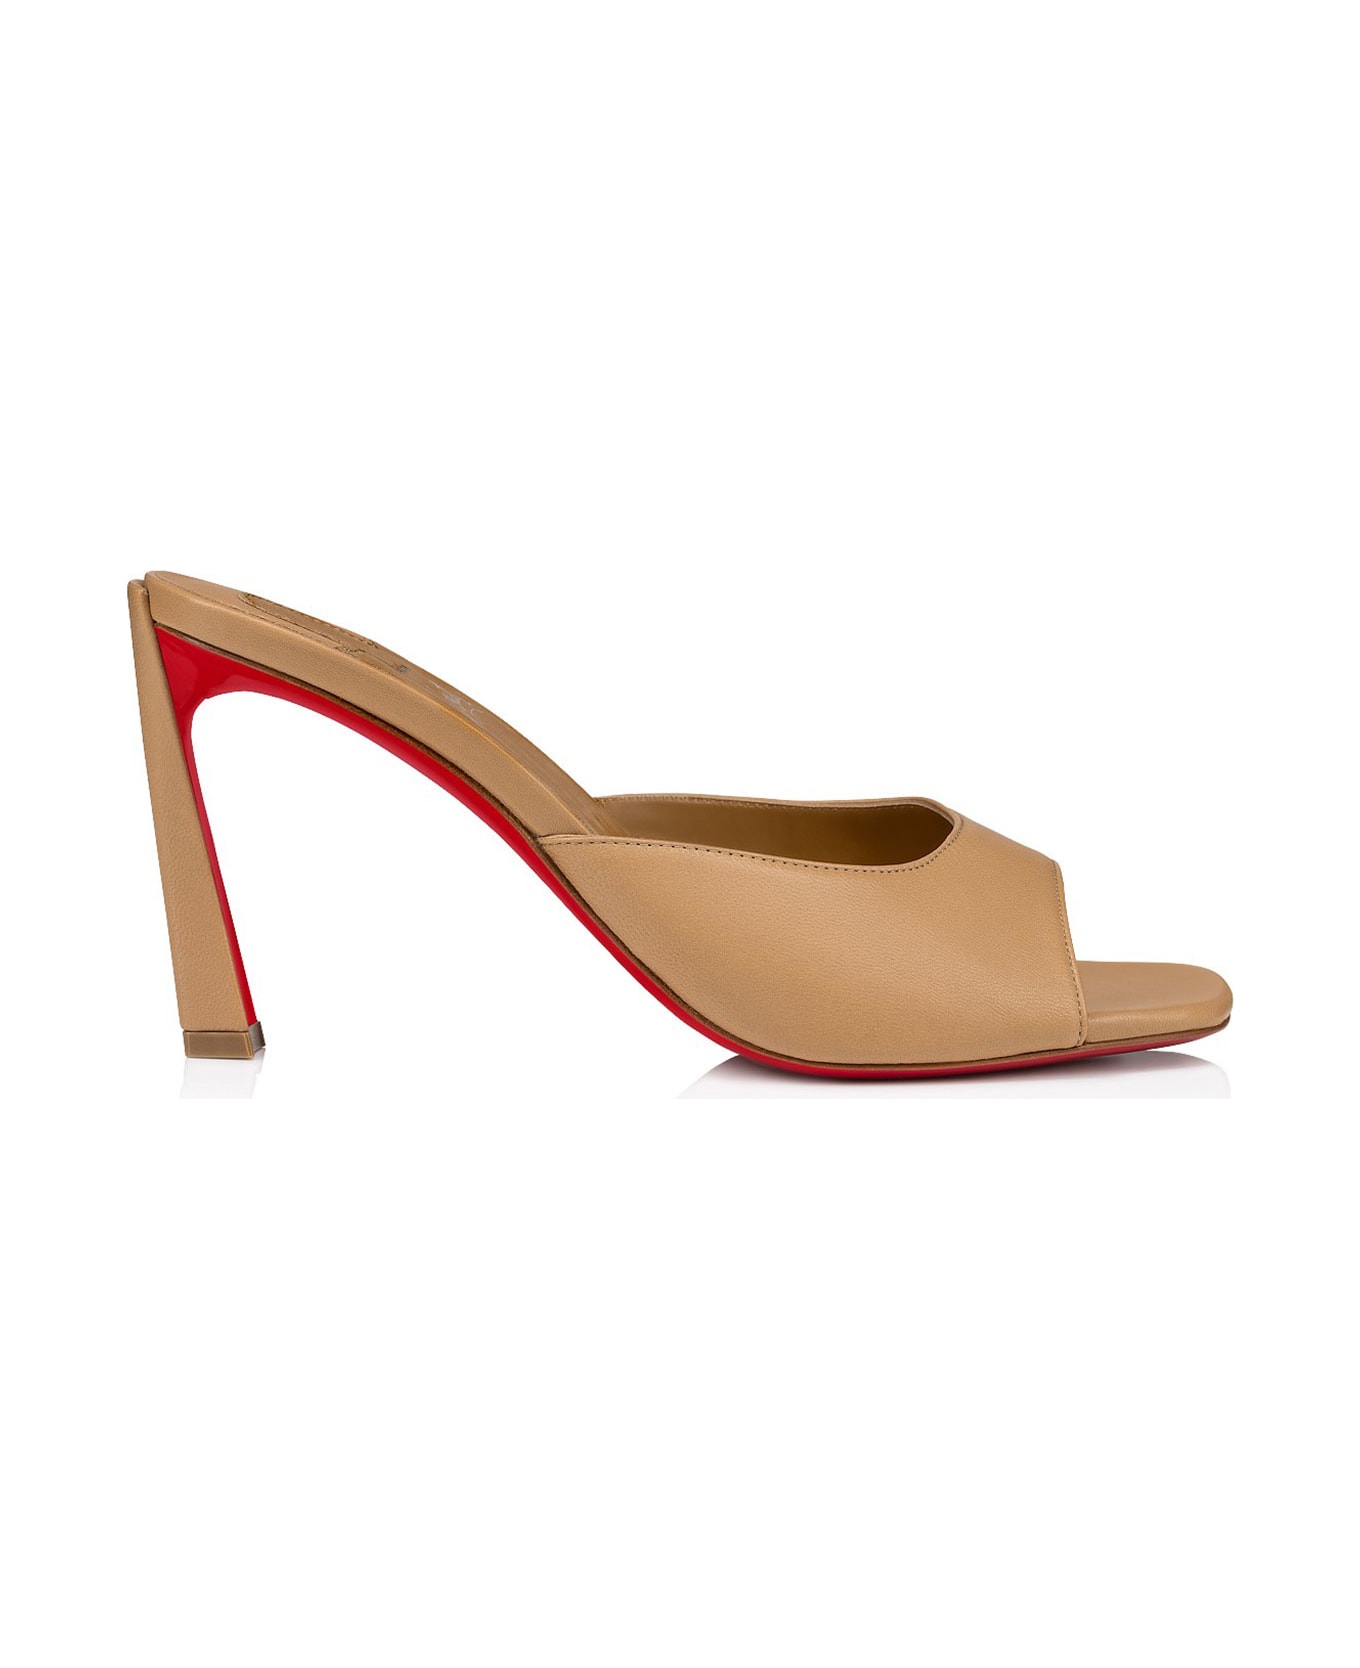 Christian Louboutin Mules Condora In Brown Leather With Heel - TOFFEE LIN TOFFEE サンダル